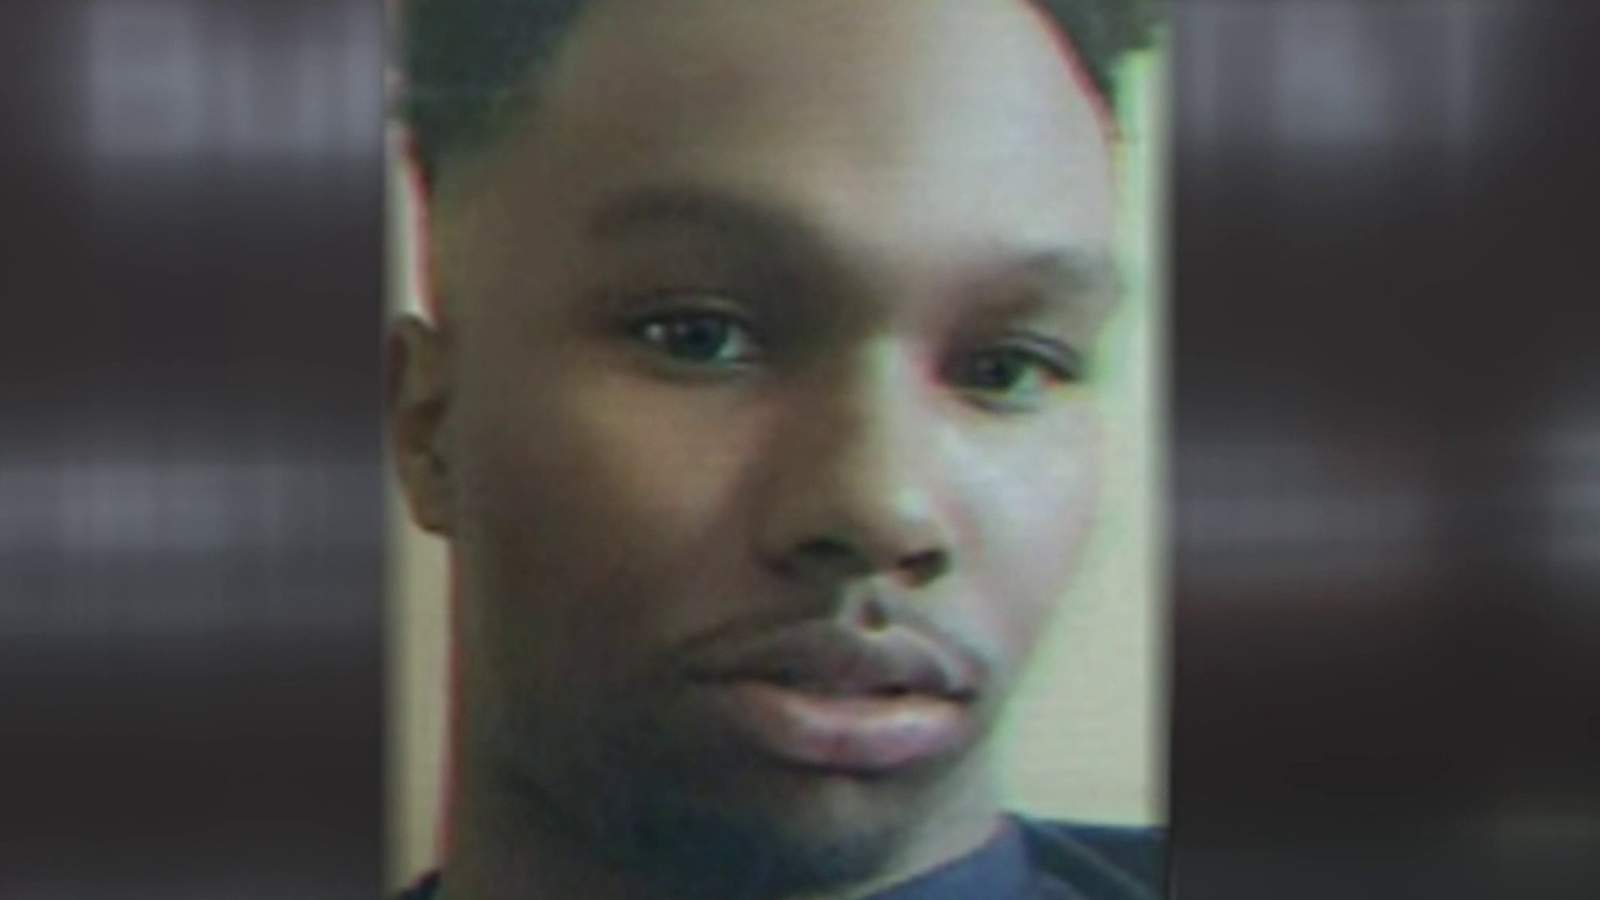 Family seeking justice for 20-year-old killed on Detroit’s west side